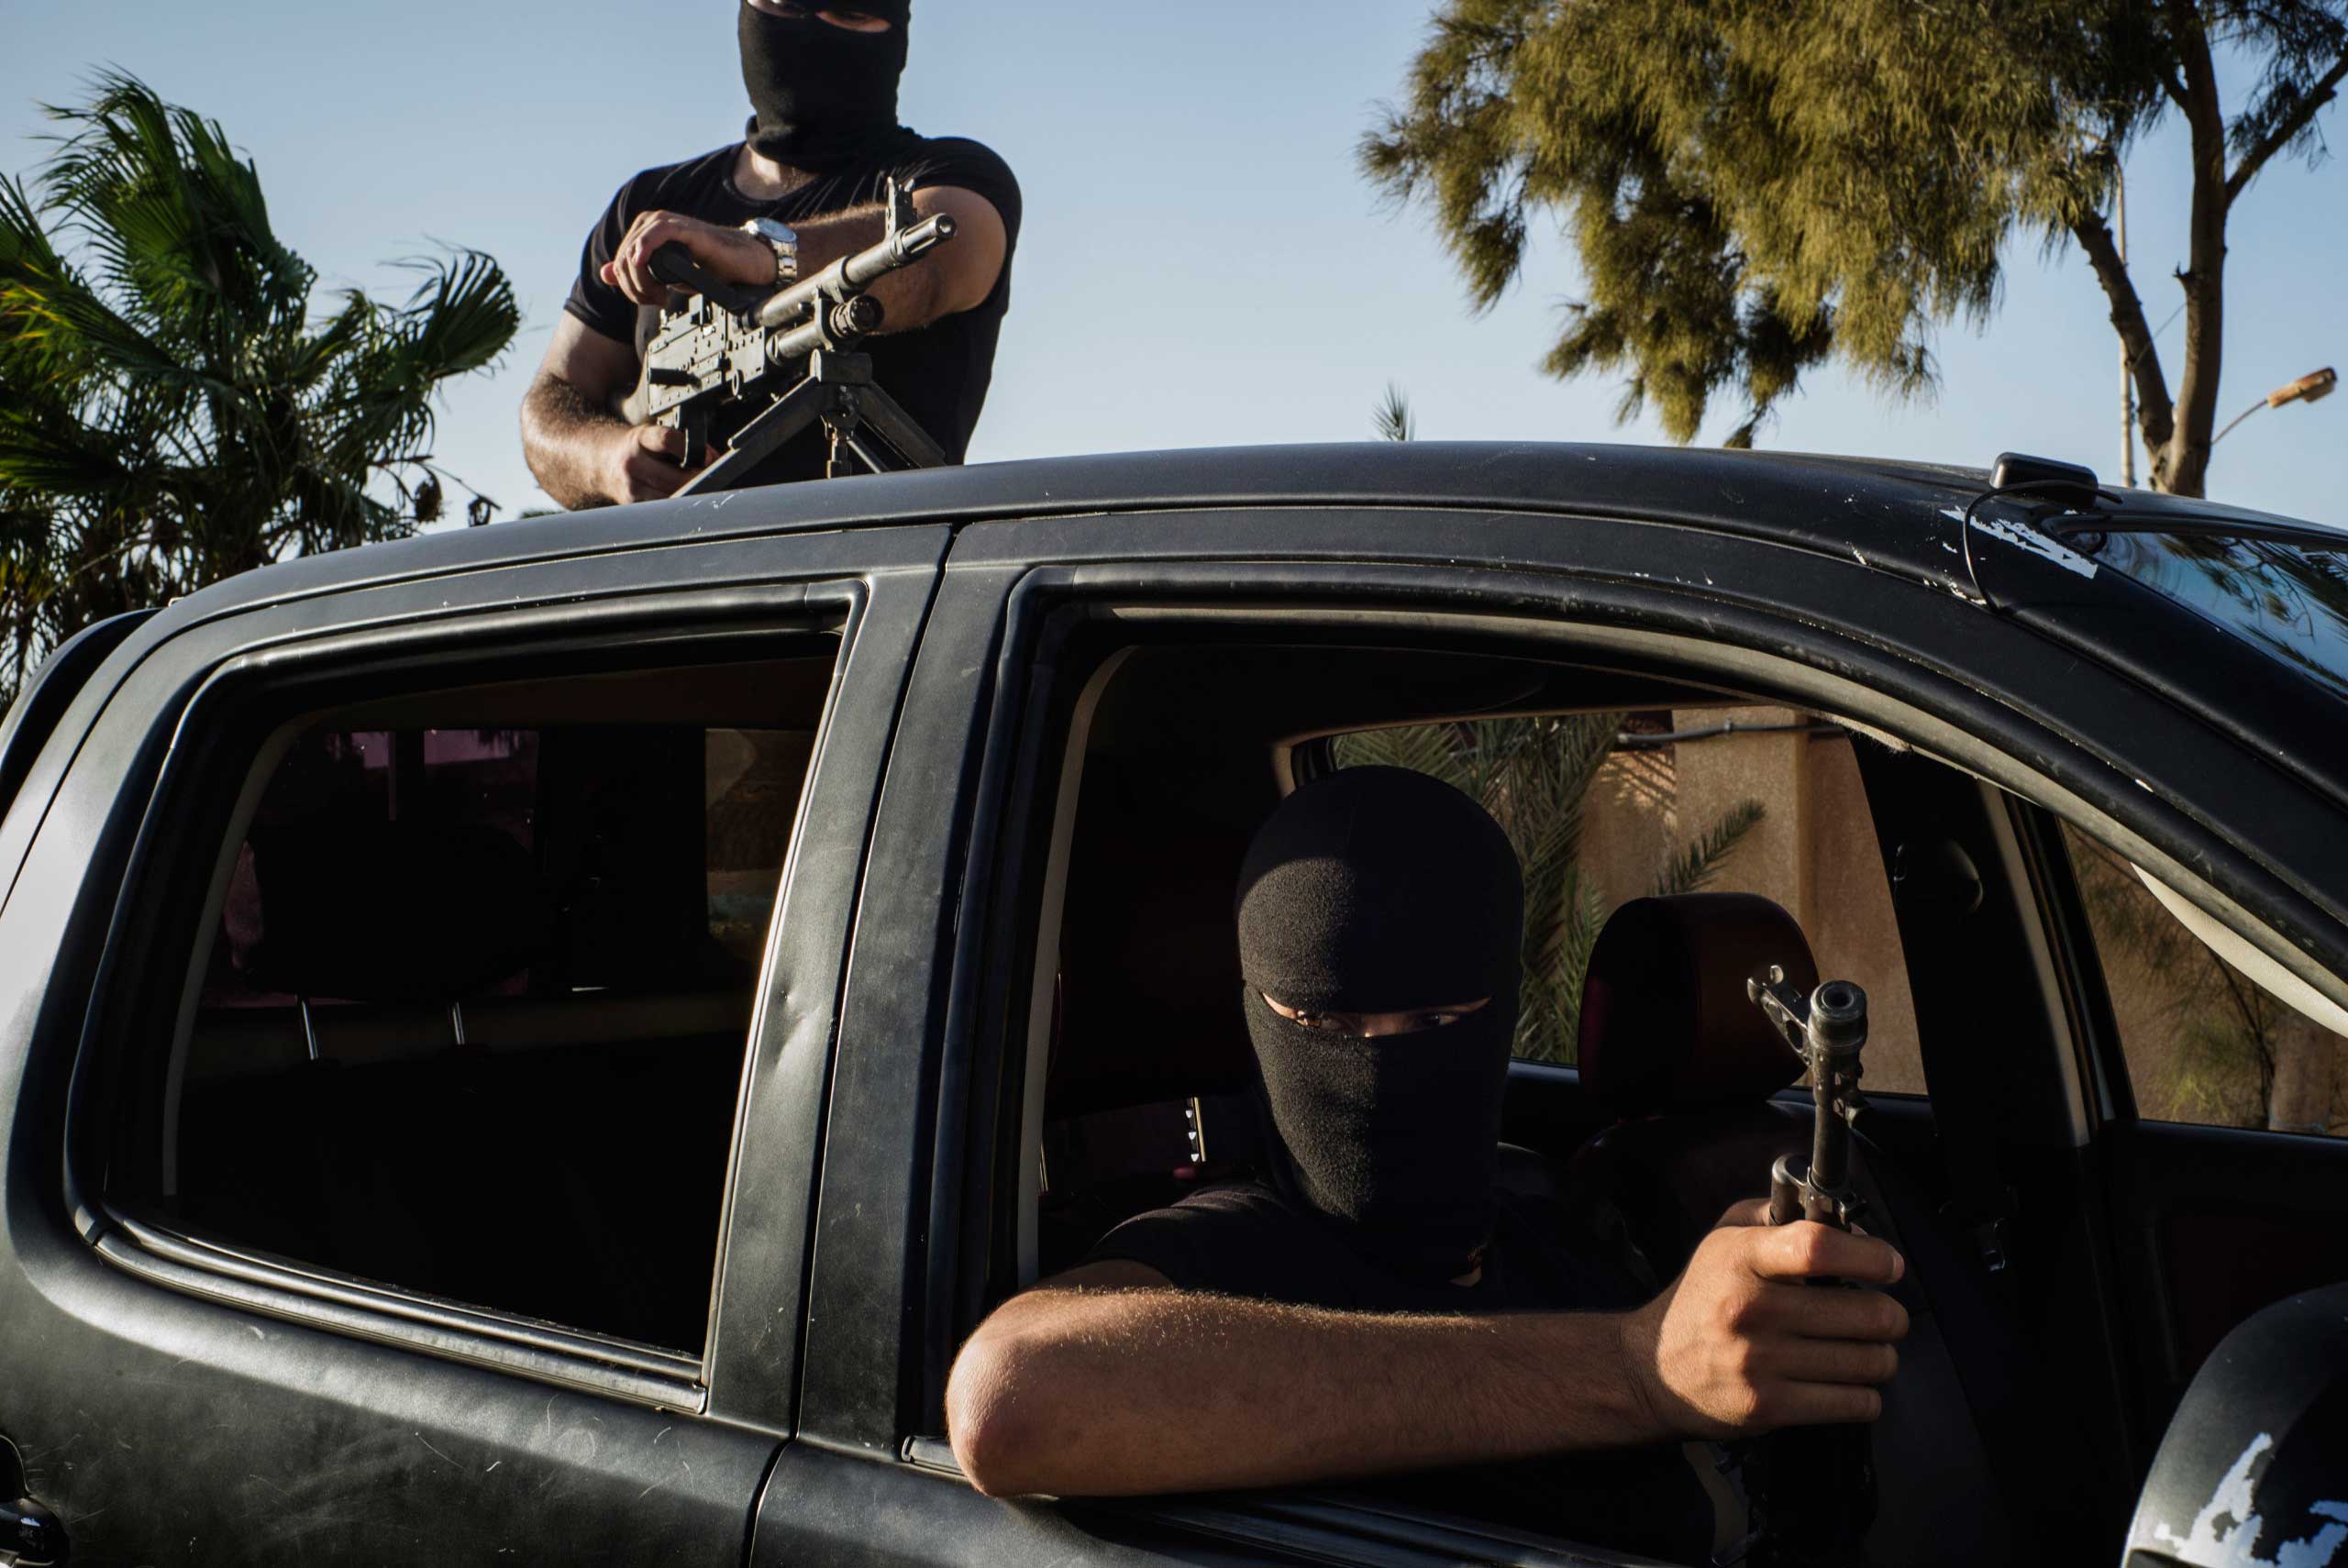 The Washington Post: A Libyan Militia Confronts the World’s Migrant Crisis Members of the Black Masks, a militia that is trying to shut down the local smuggling business, drive through Zuwarah.